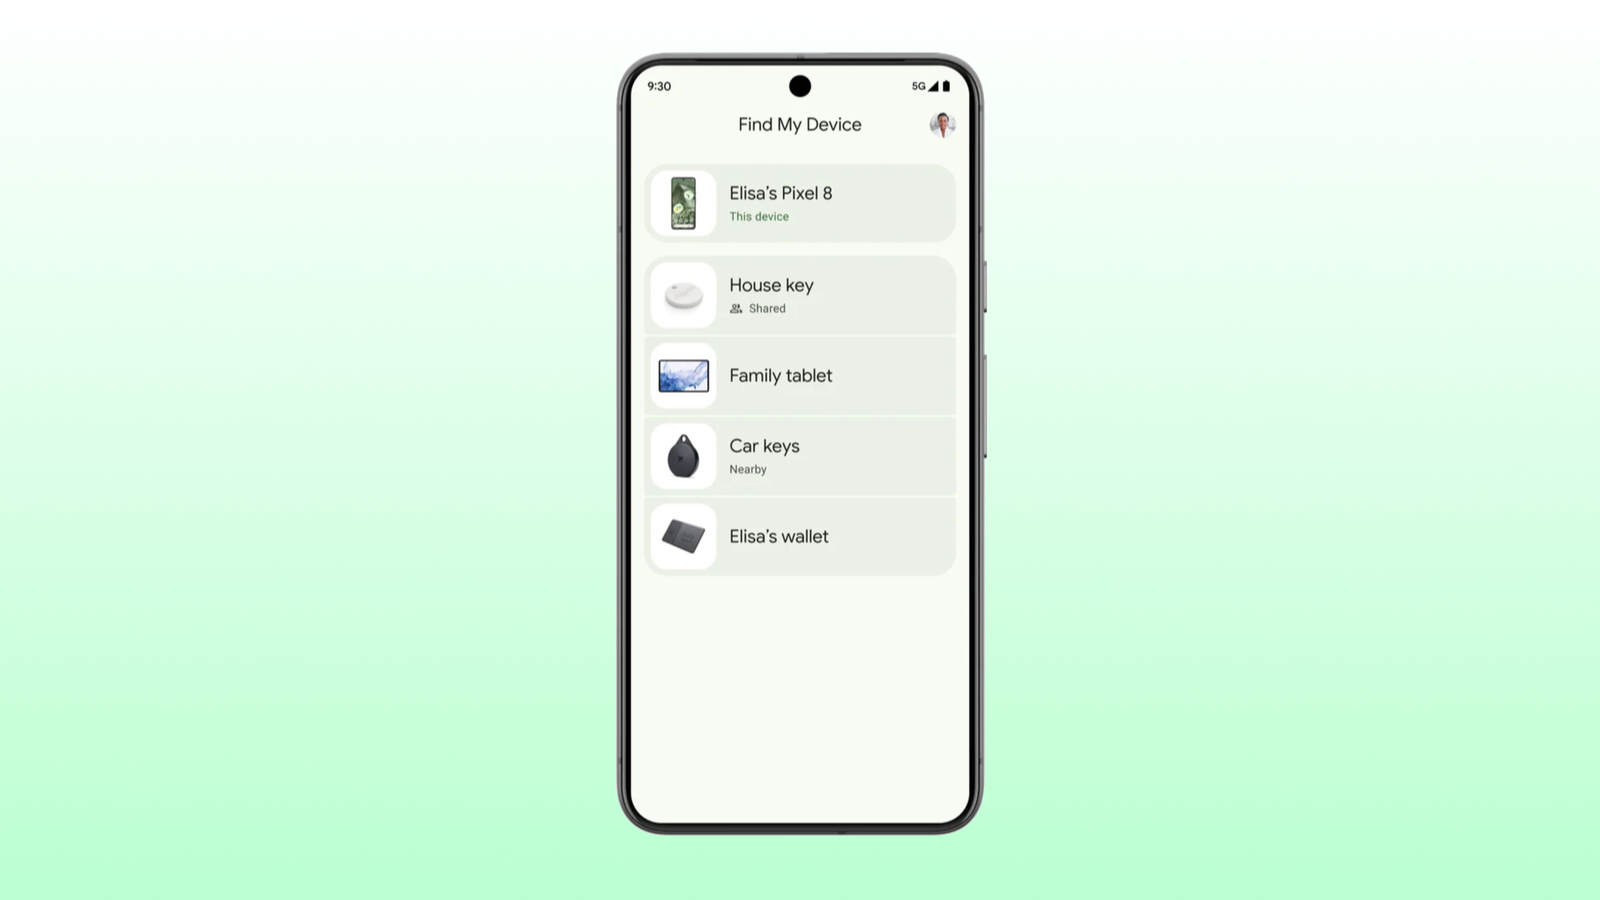 A render of Find My device against a gradient background.